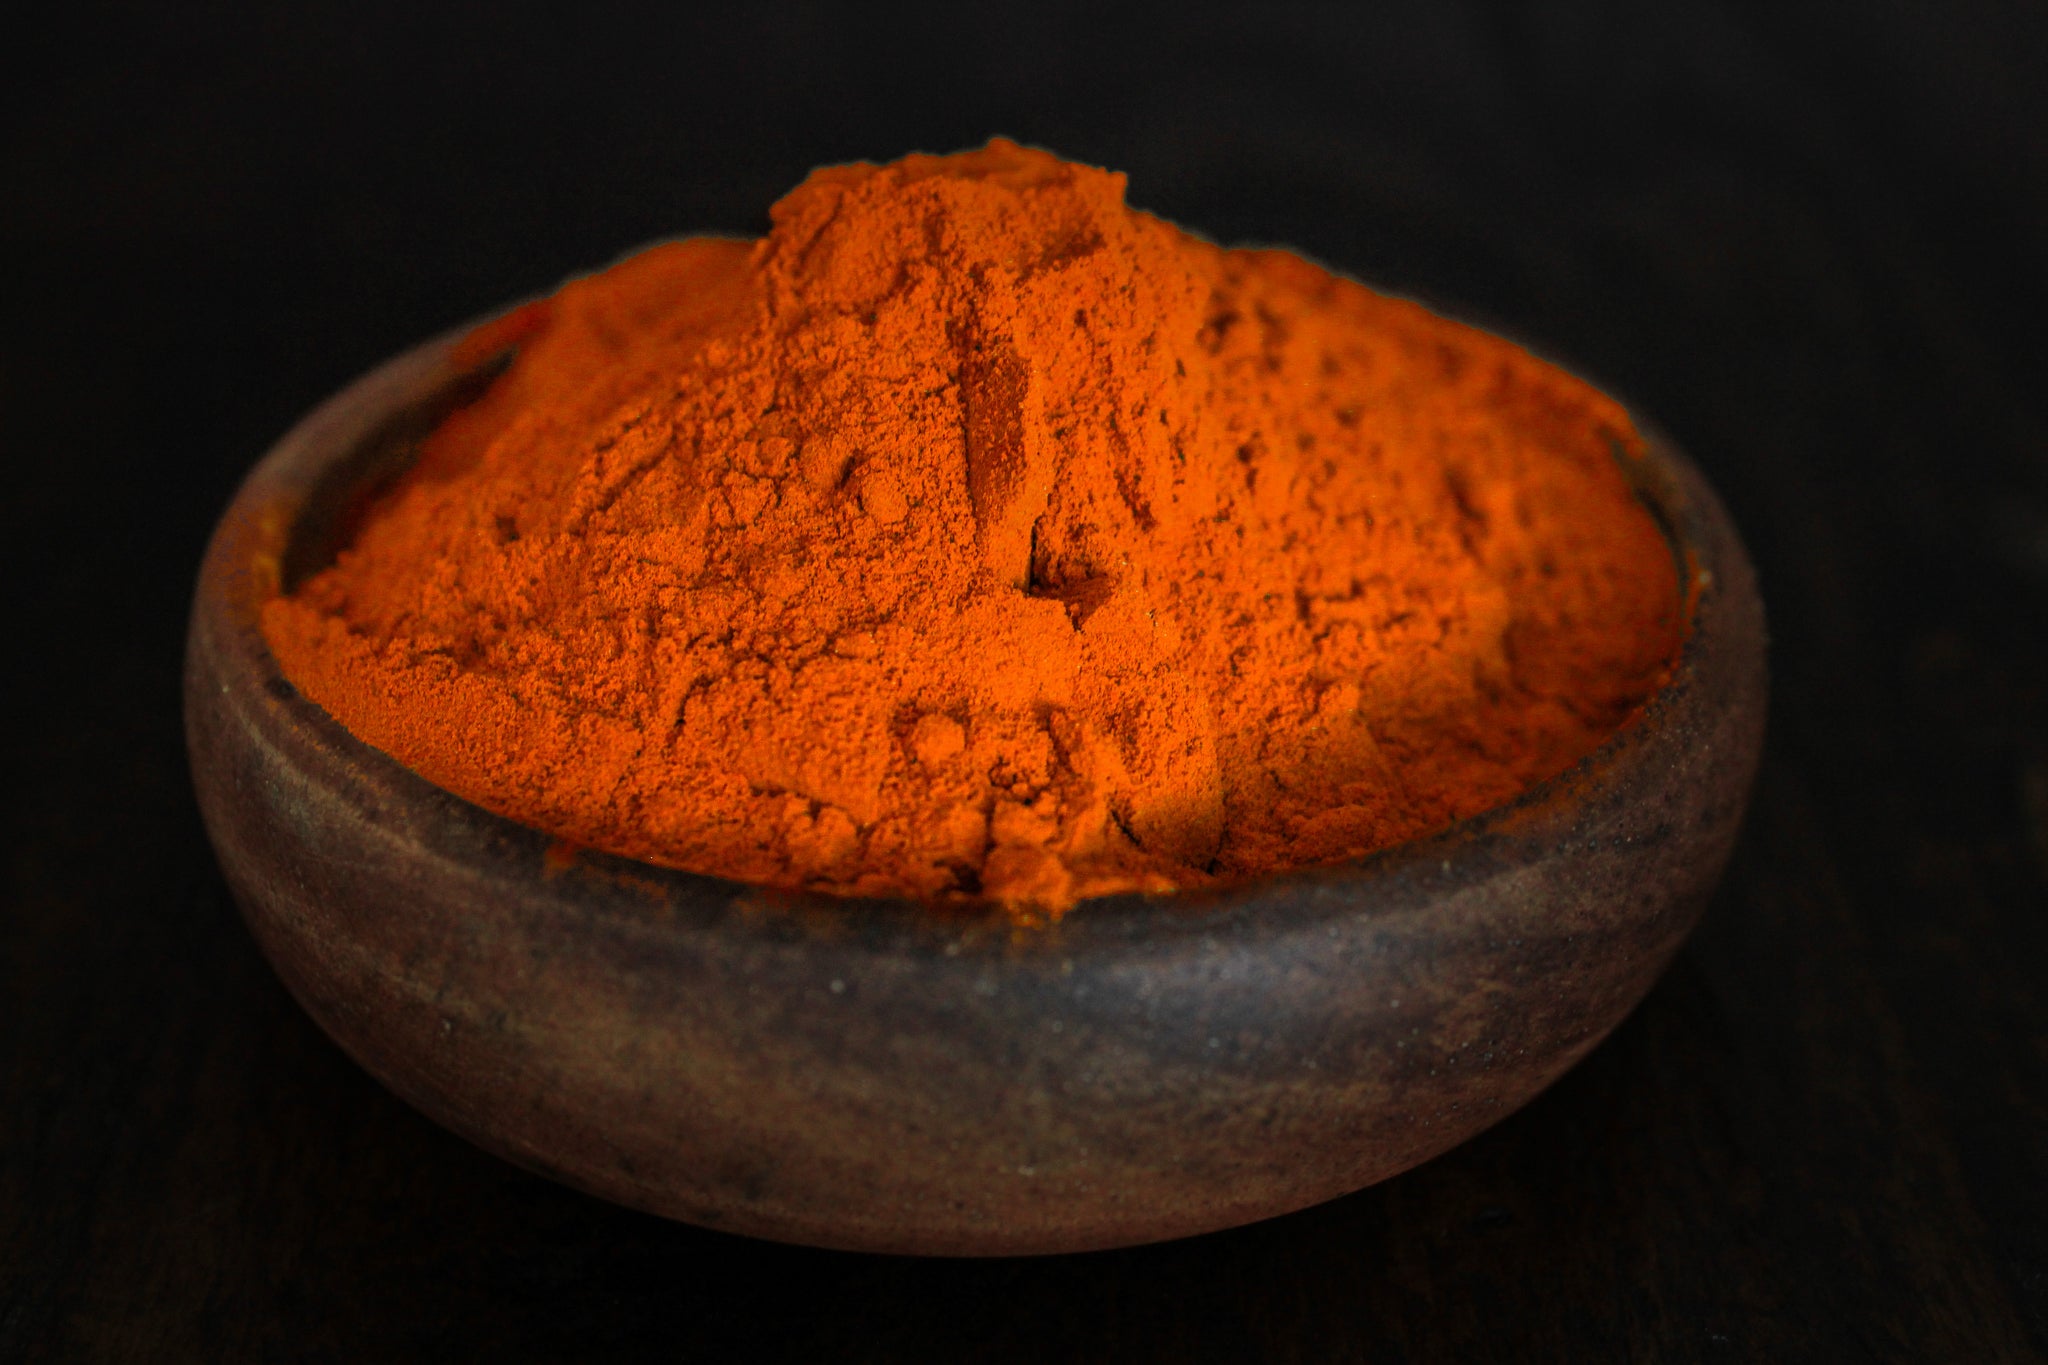 Strong potent curcumin extract shown in wooden bowl